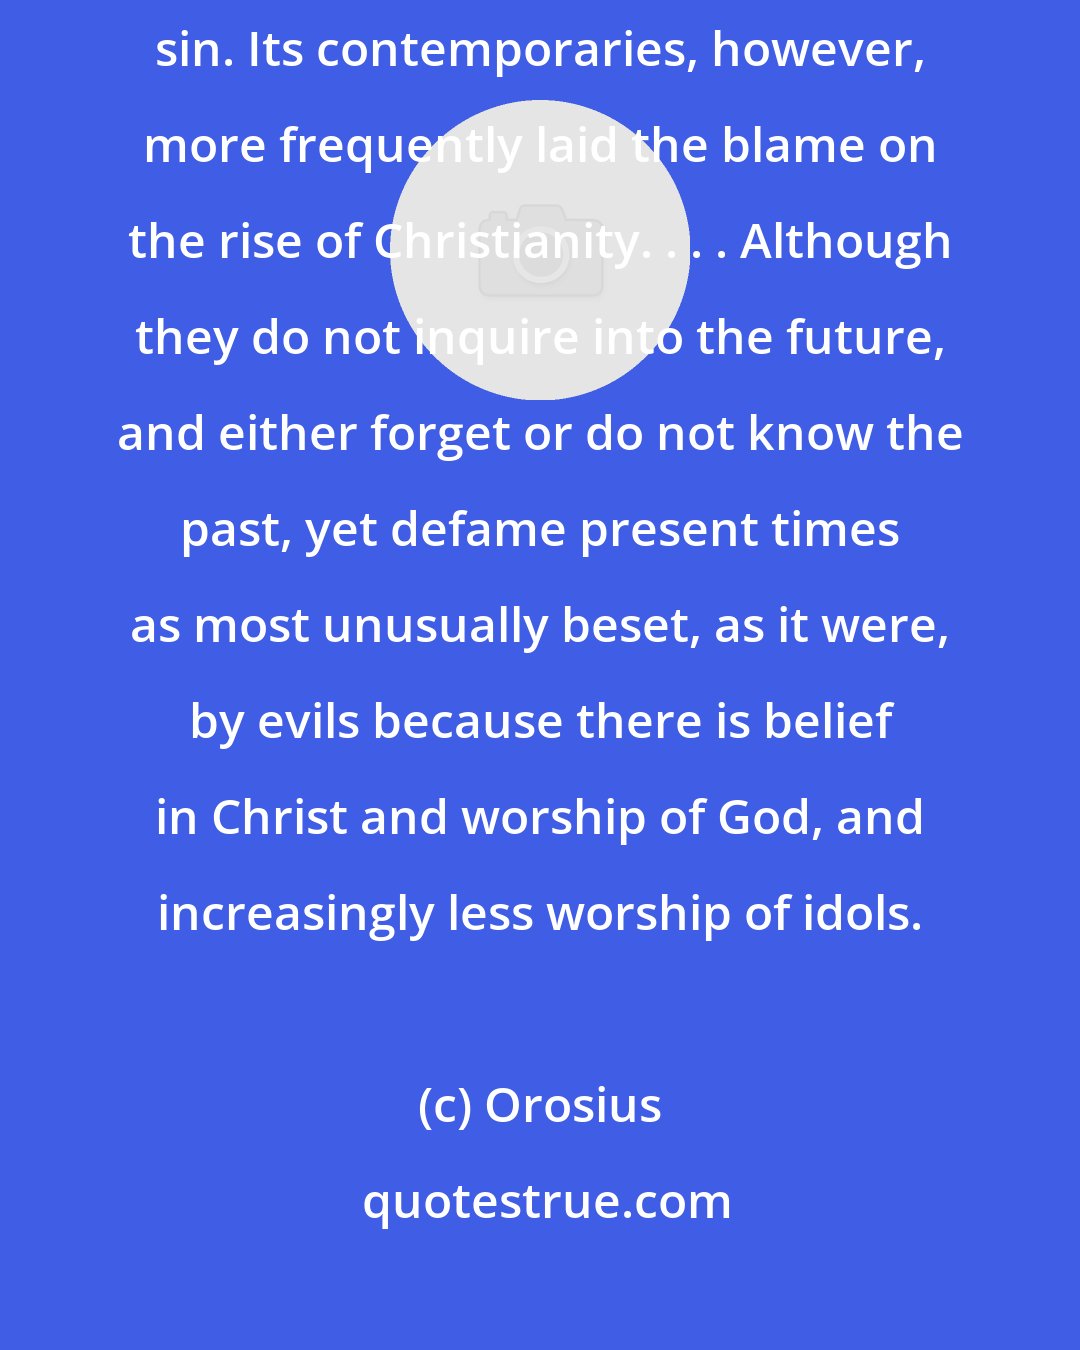 Orosius: The fall of Rome is often regarded as an object lesson in the wages of sin. Its contemporaries, however, more frequently laid the blame on the rise of Christianity. . . . Although they do not inquire into the future, and either forget or do not know the past, yet defame present times as most unusually beset, as it were, by evils because there is belief in Christ and worship of God, and increasingly less worship of idols.